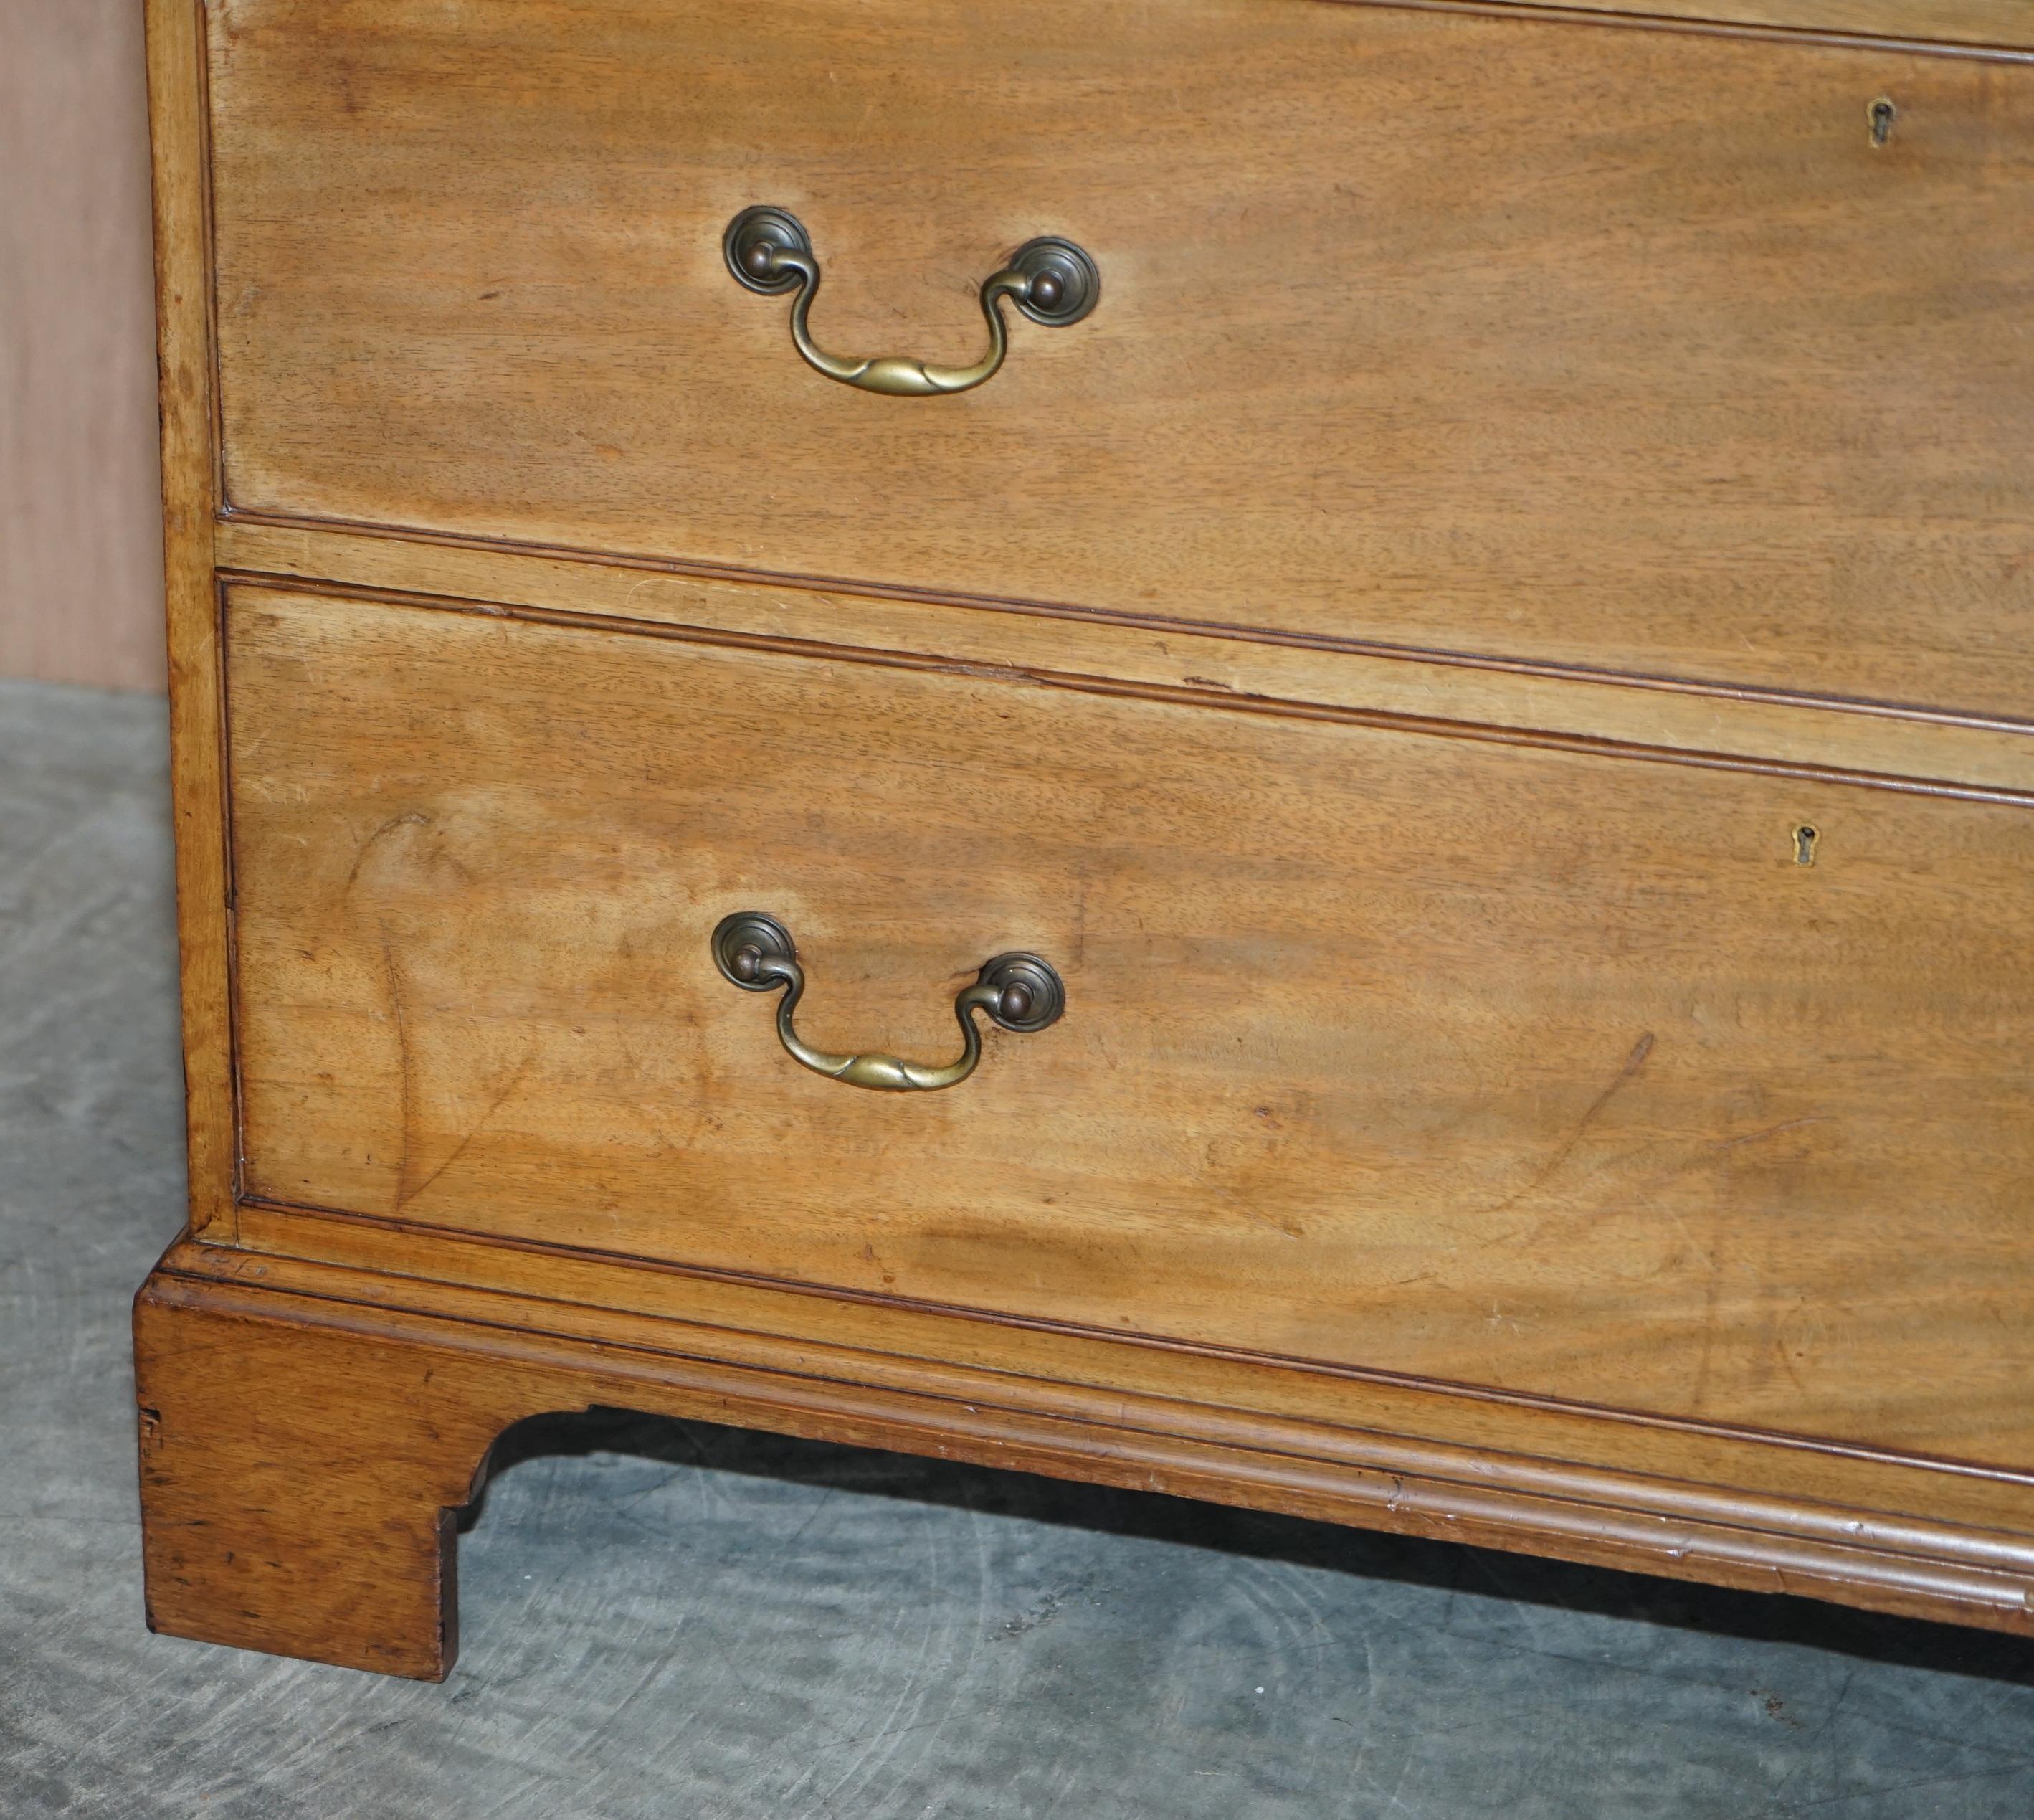 Late 19th Century Antique Howard & Son's Berners Street Hardwood Linen Press Chest of Drawers